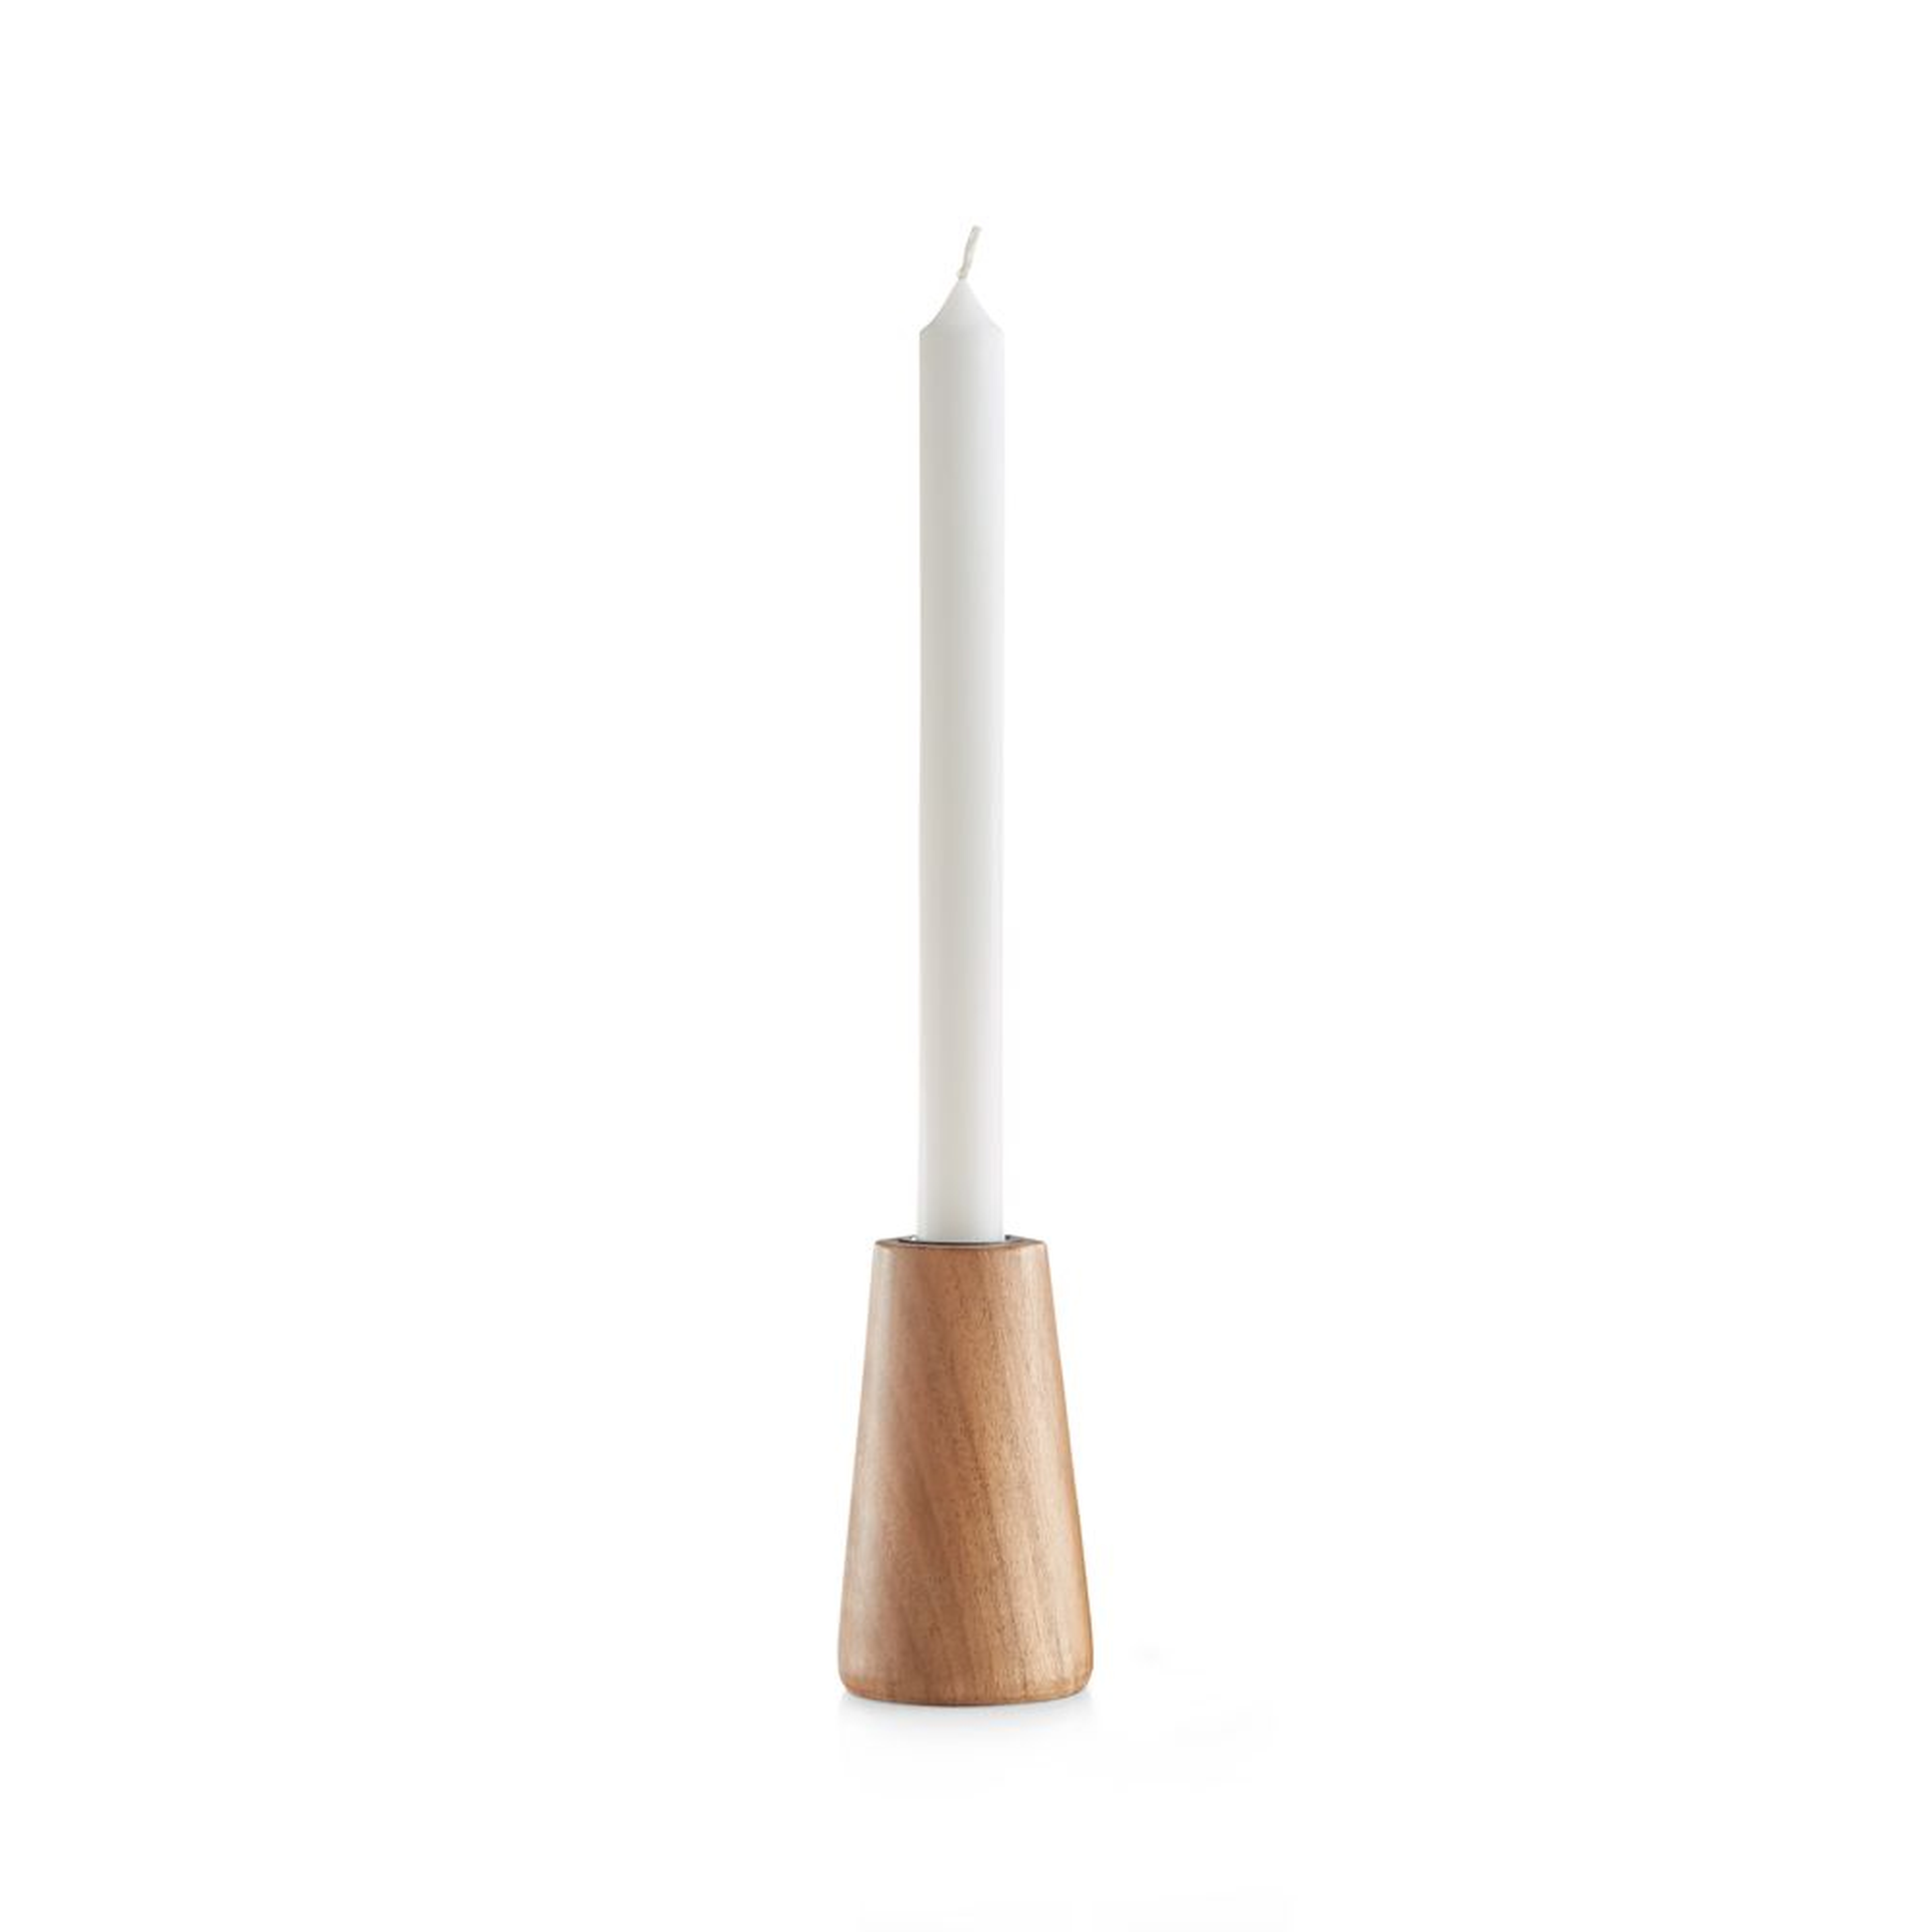 Wood Taper Candle Holder - Crate and Barrel